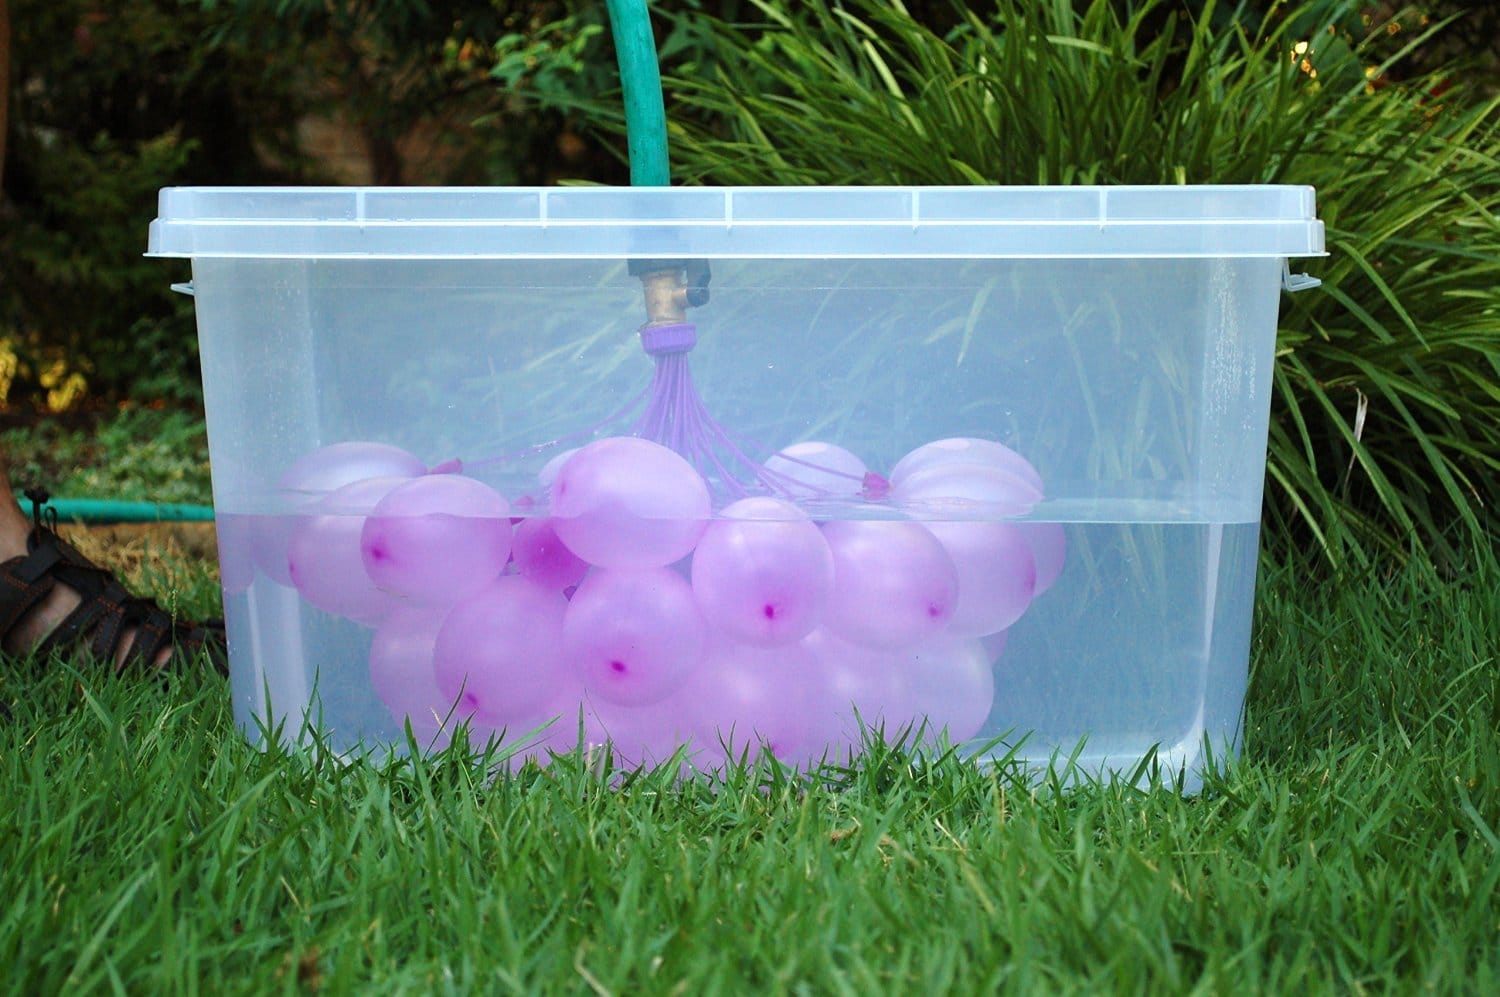 Plastic container full of water and water balloons on a green grass.
